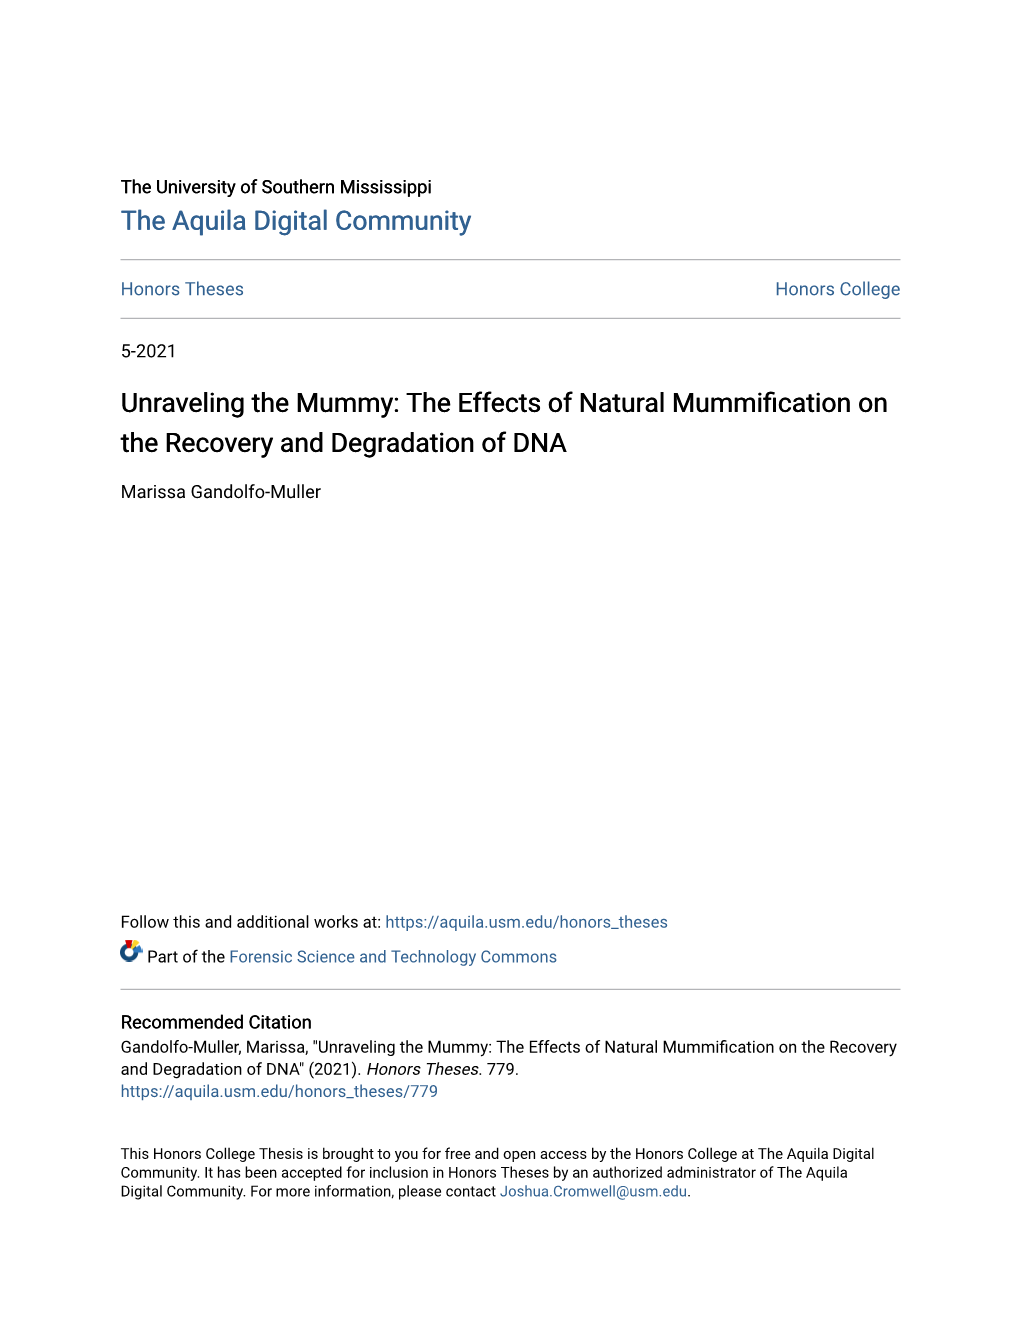 The Effects of Natural Mummification on the Recovery and Degradation of DNA